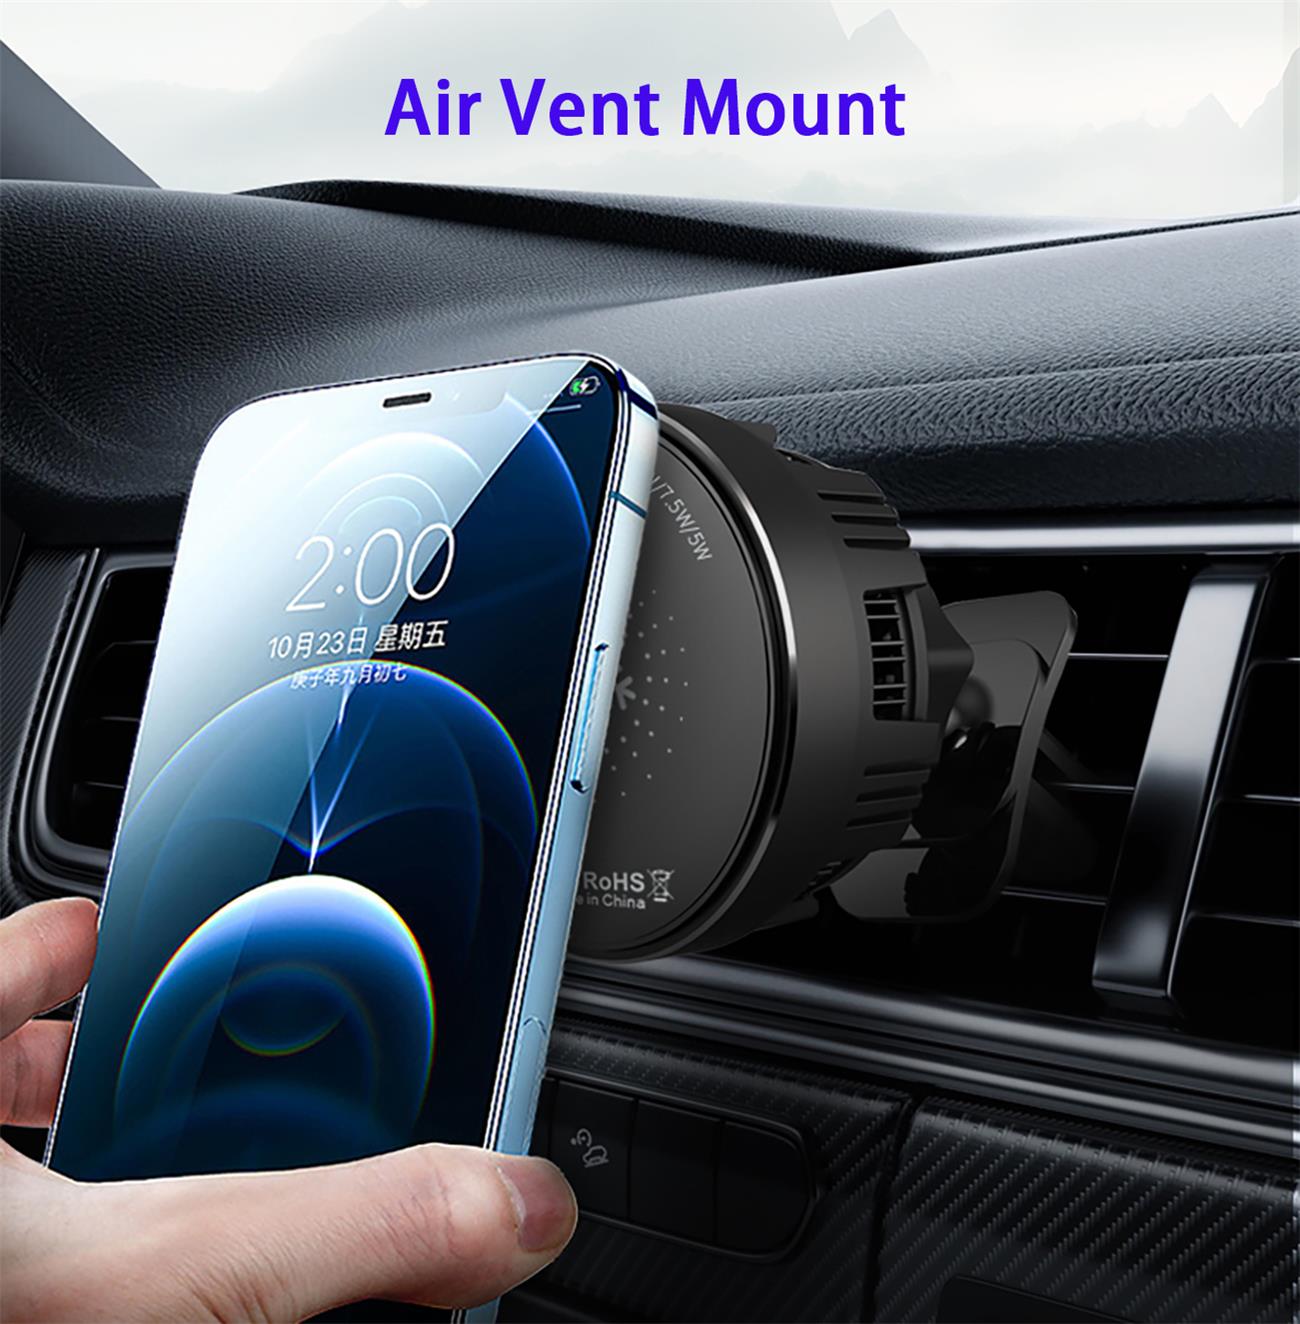 Qi2 Magnetic Wireless Car Charger With Semiconductor cooling